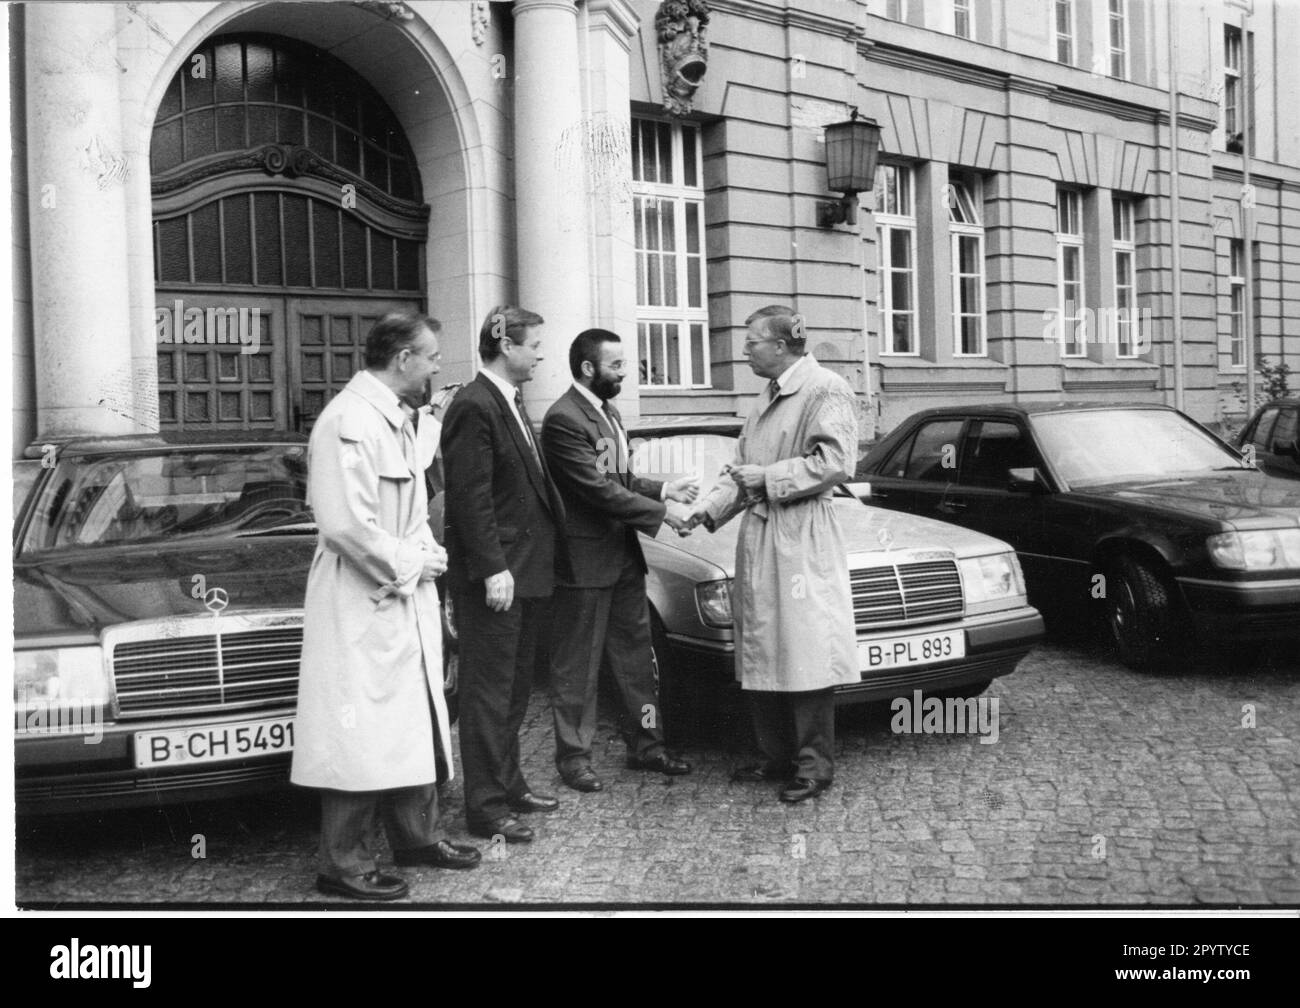 3 Mercedes 250 D passenger cars were handed over for testing by Günter Birkner(r.), Director of the Mercedes- Benz AG Berlin branch to Jochen Wolf, Government Plenipotentiary for the Potsdam district. With this gesture, Mercedes-Benz AG wants to support the Brandenburg state government.GDR. historical. Wende/Turnaround. Photo:MAZ/Christel Köster 26.09.1990 [automated translation] Stock Photo